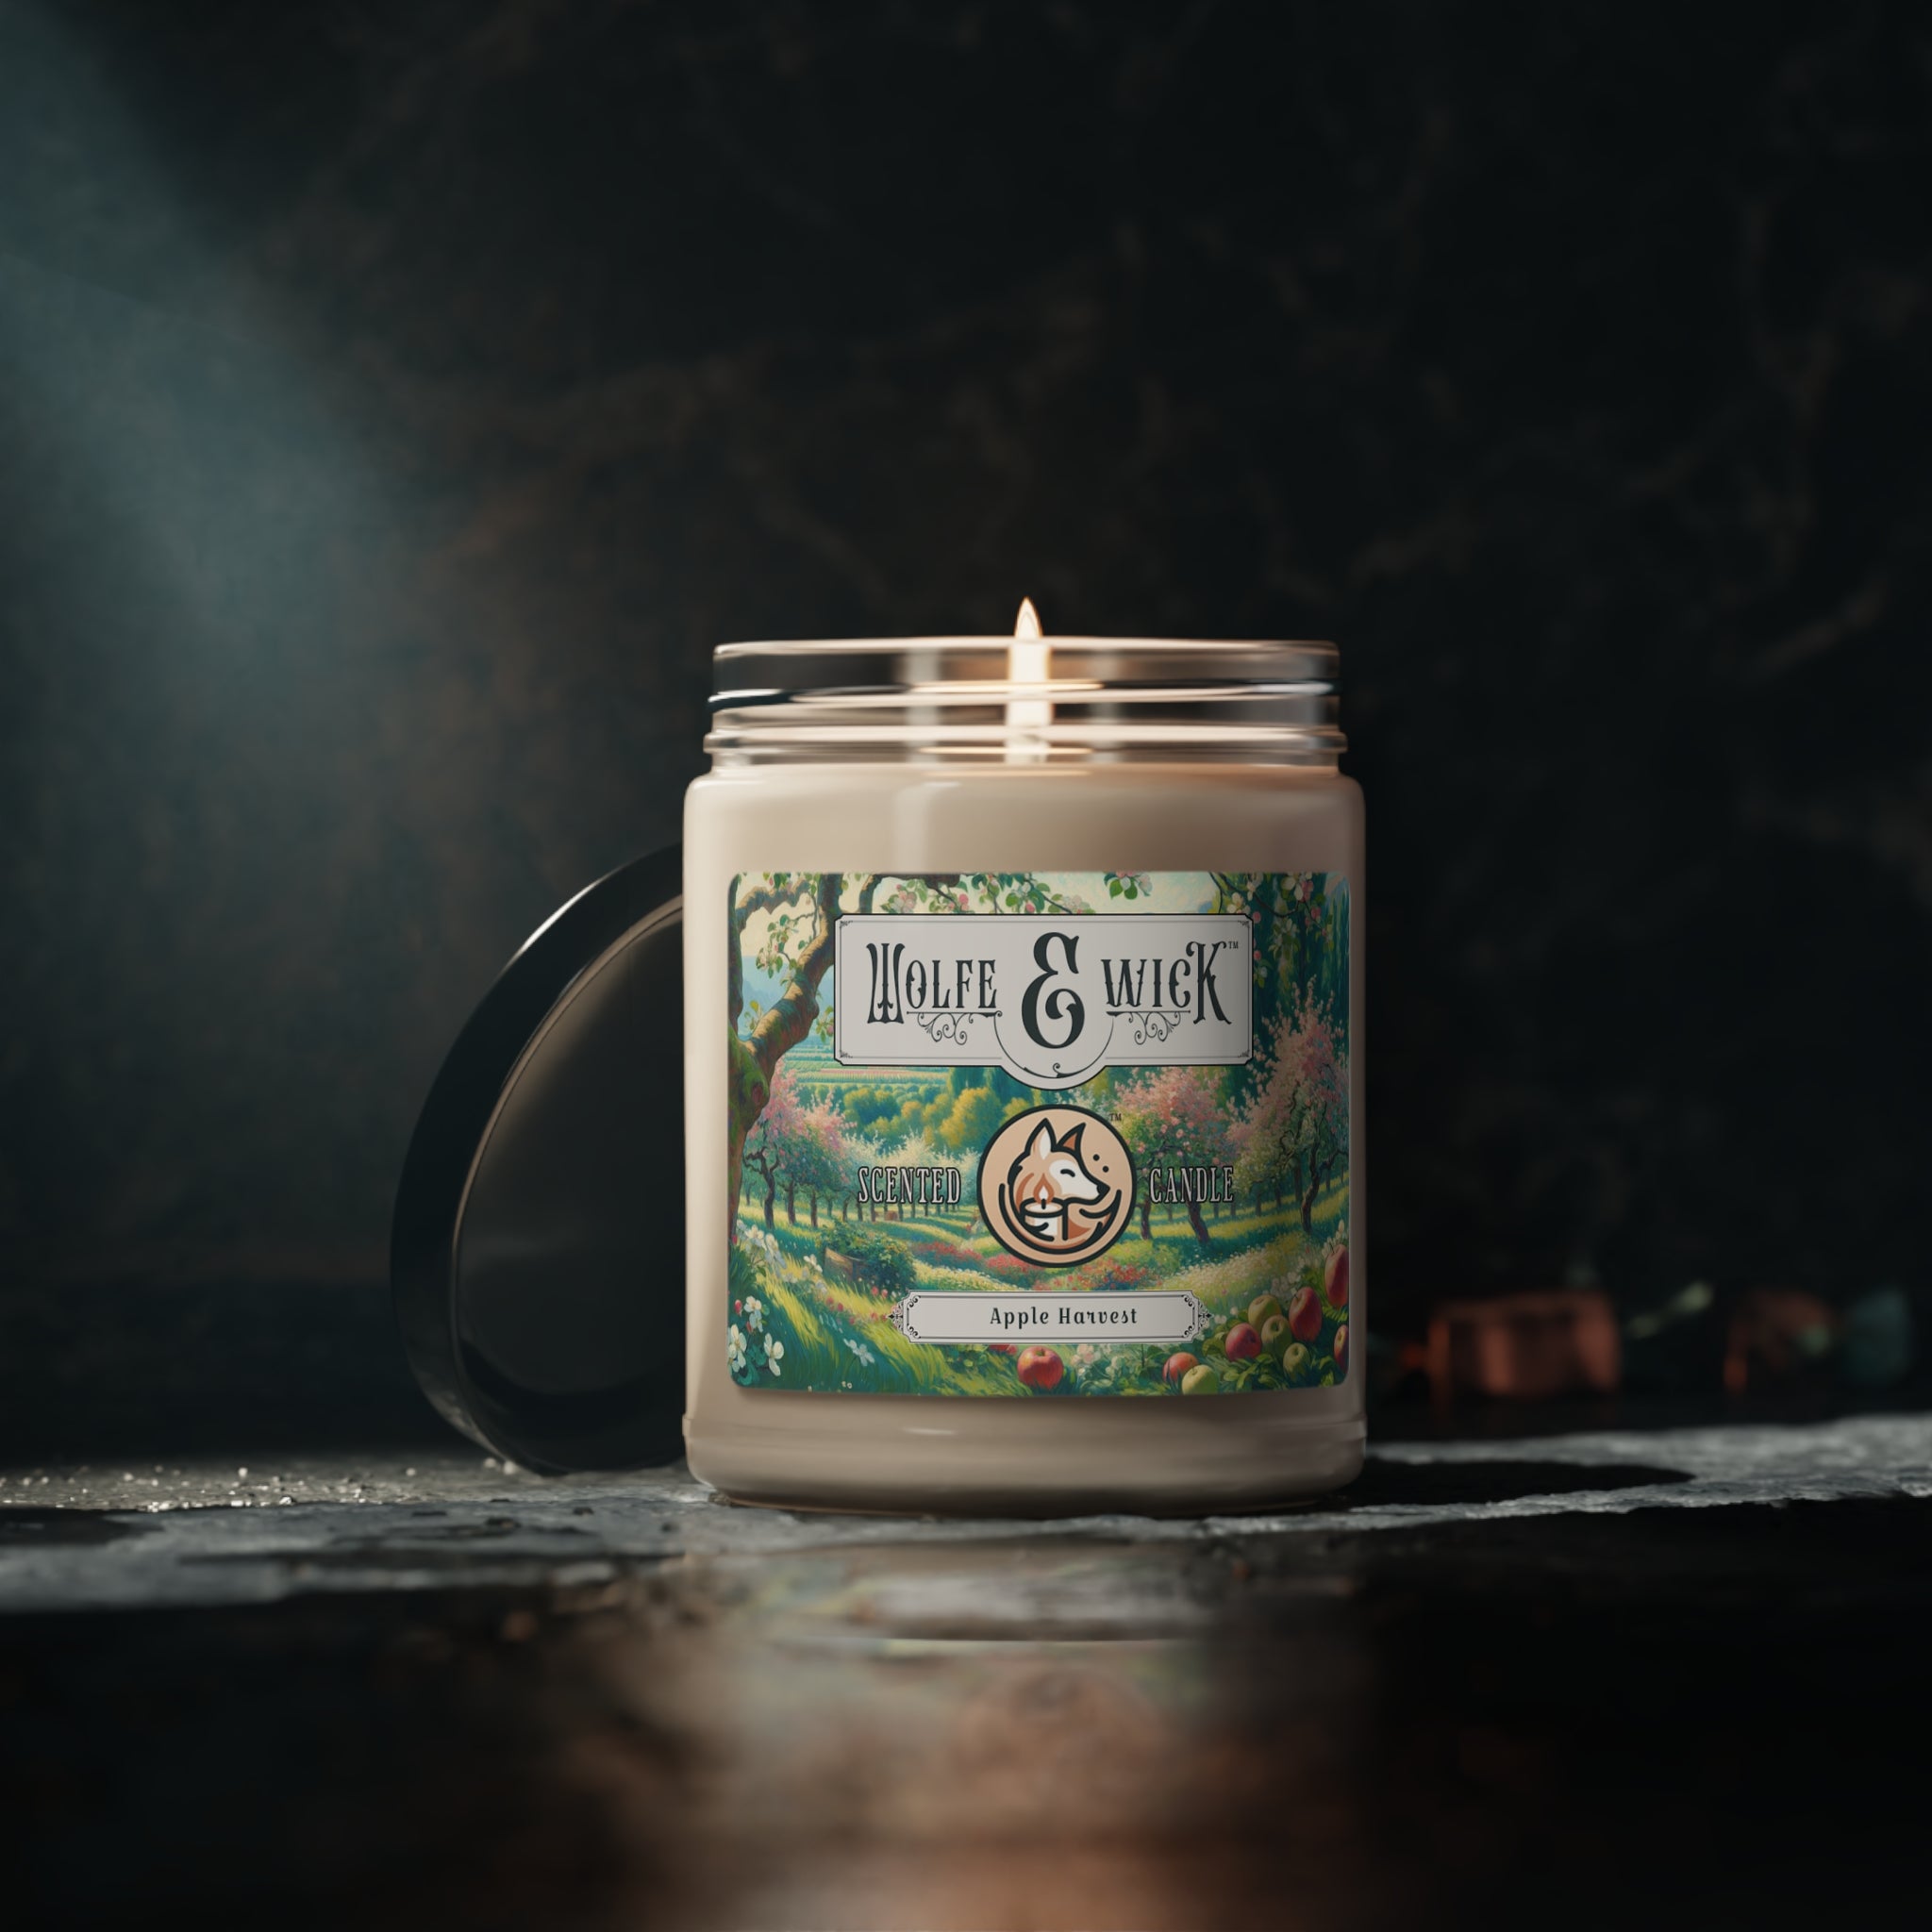 Wolfe & Wick's Adventure Aromas: Eco-Friendly Natural Soy Scented Candles